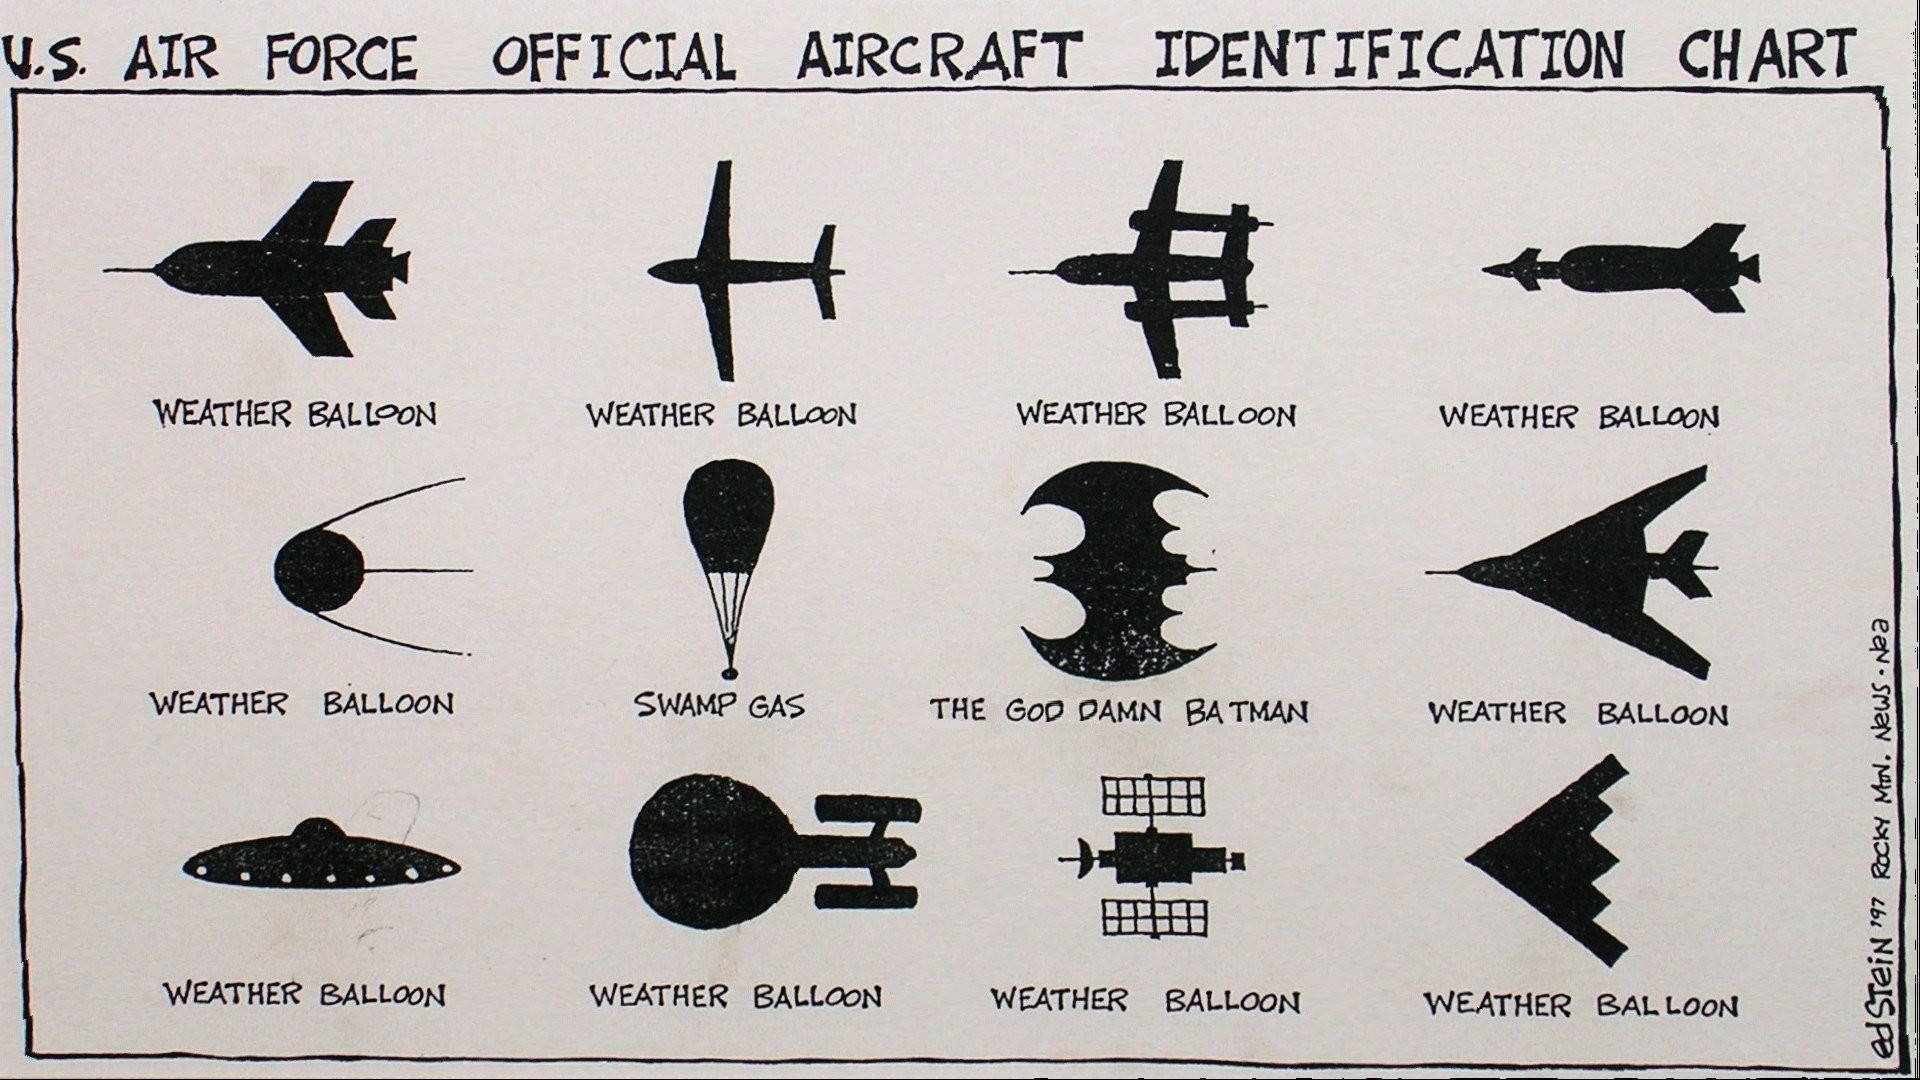 Air Force Mock Identification Chart